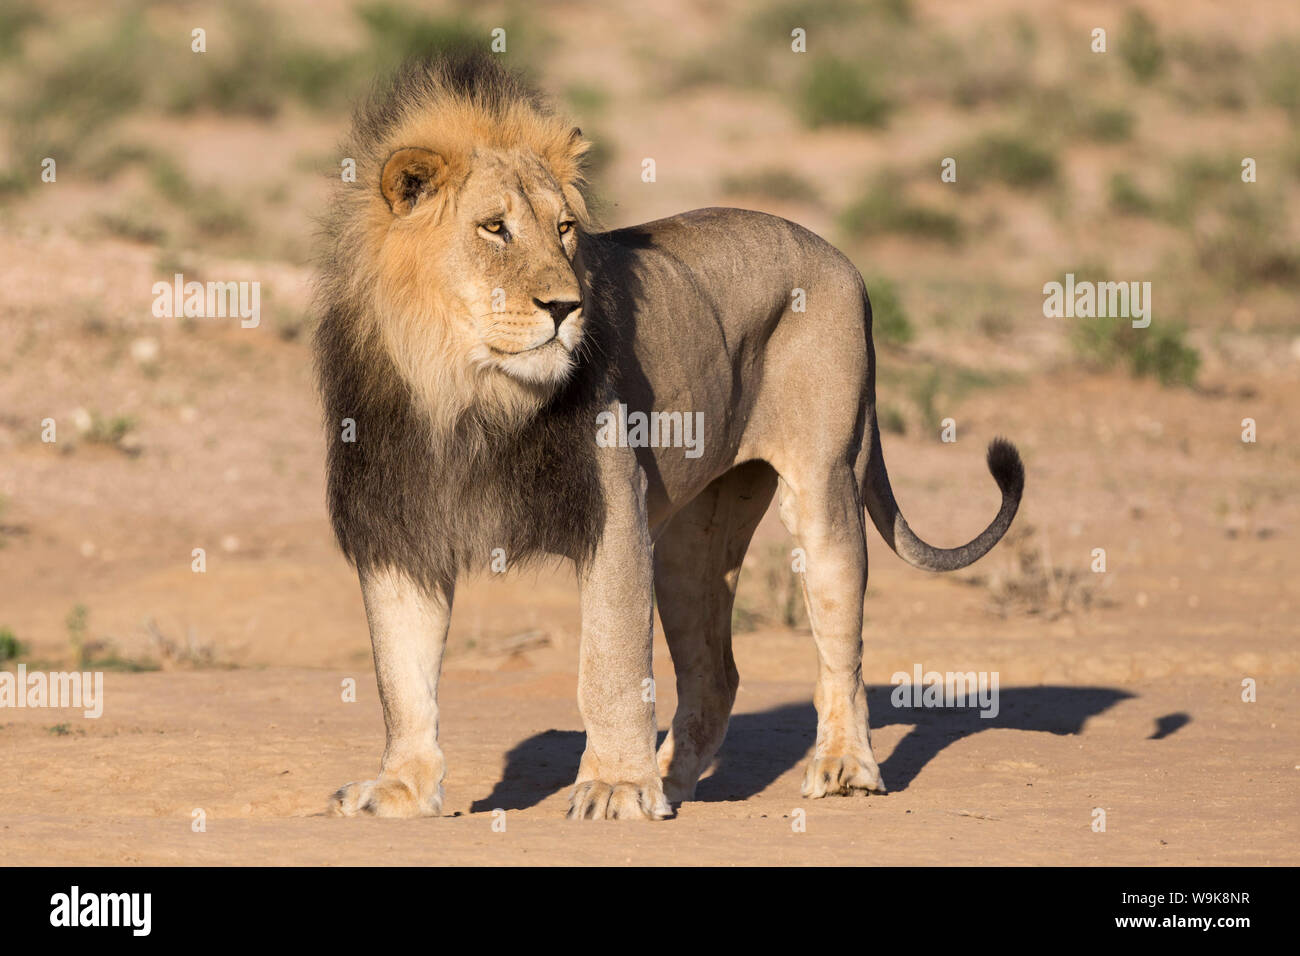 Male lion (Panthera leo) on patrol, Kgalagadi Transfrontier Park, Northern Cape, South Africa, Africa Stock Photo